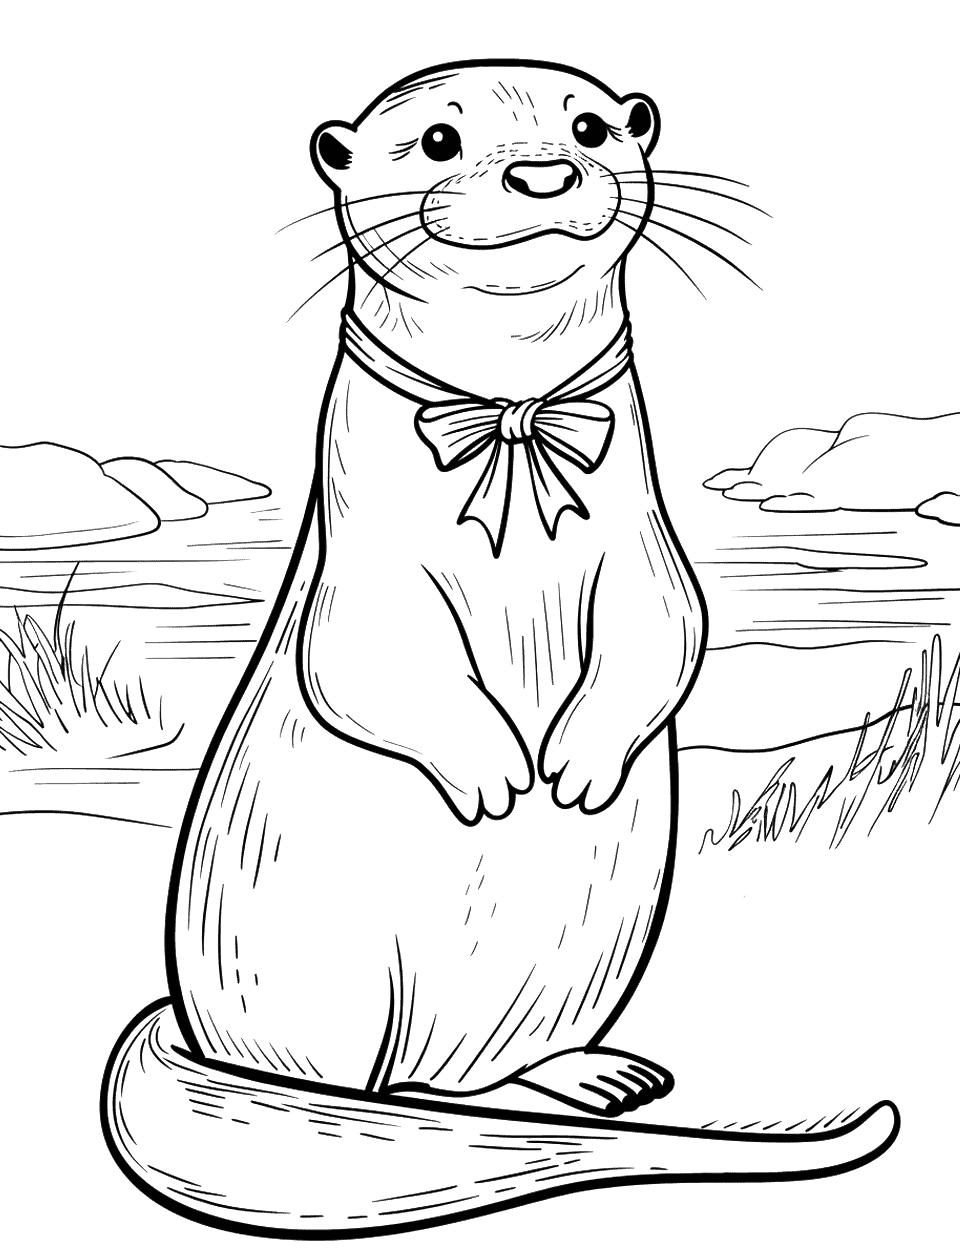 Otter Wearing a Bow Tie Coloring Page - A charming otter dressed in a bow tie, standing upright.